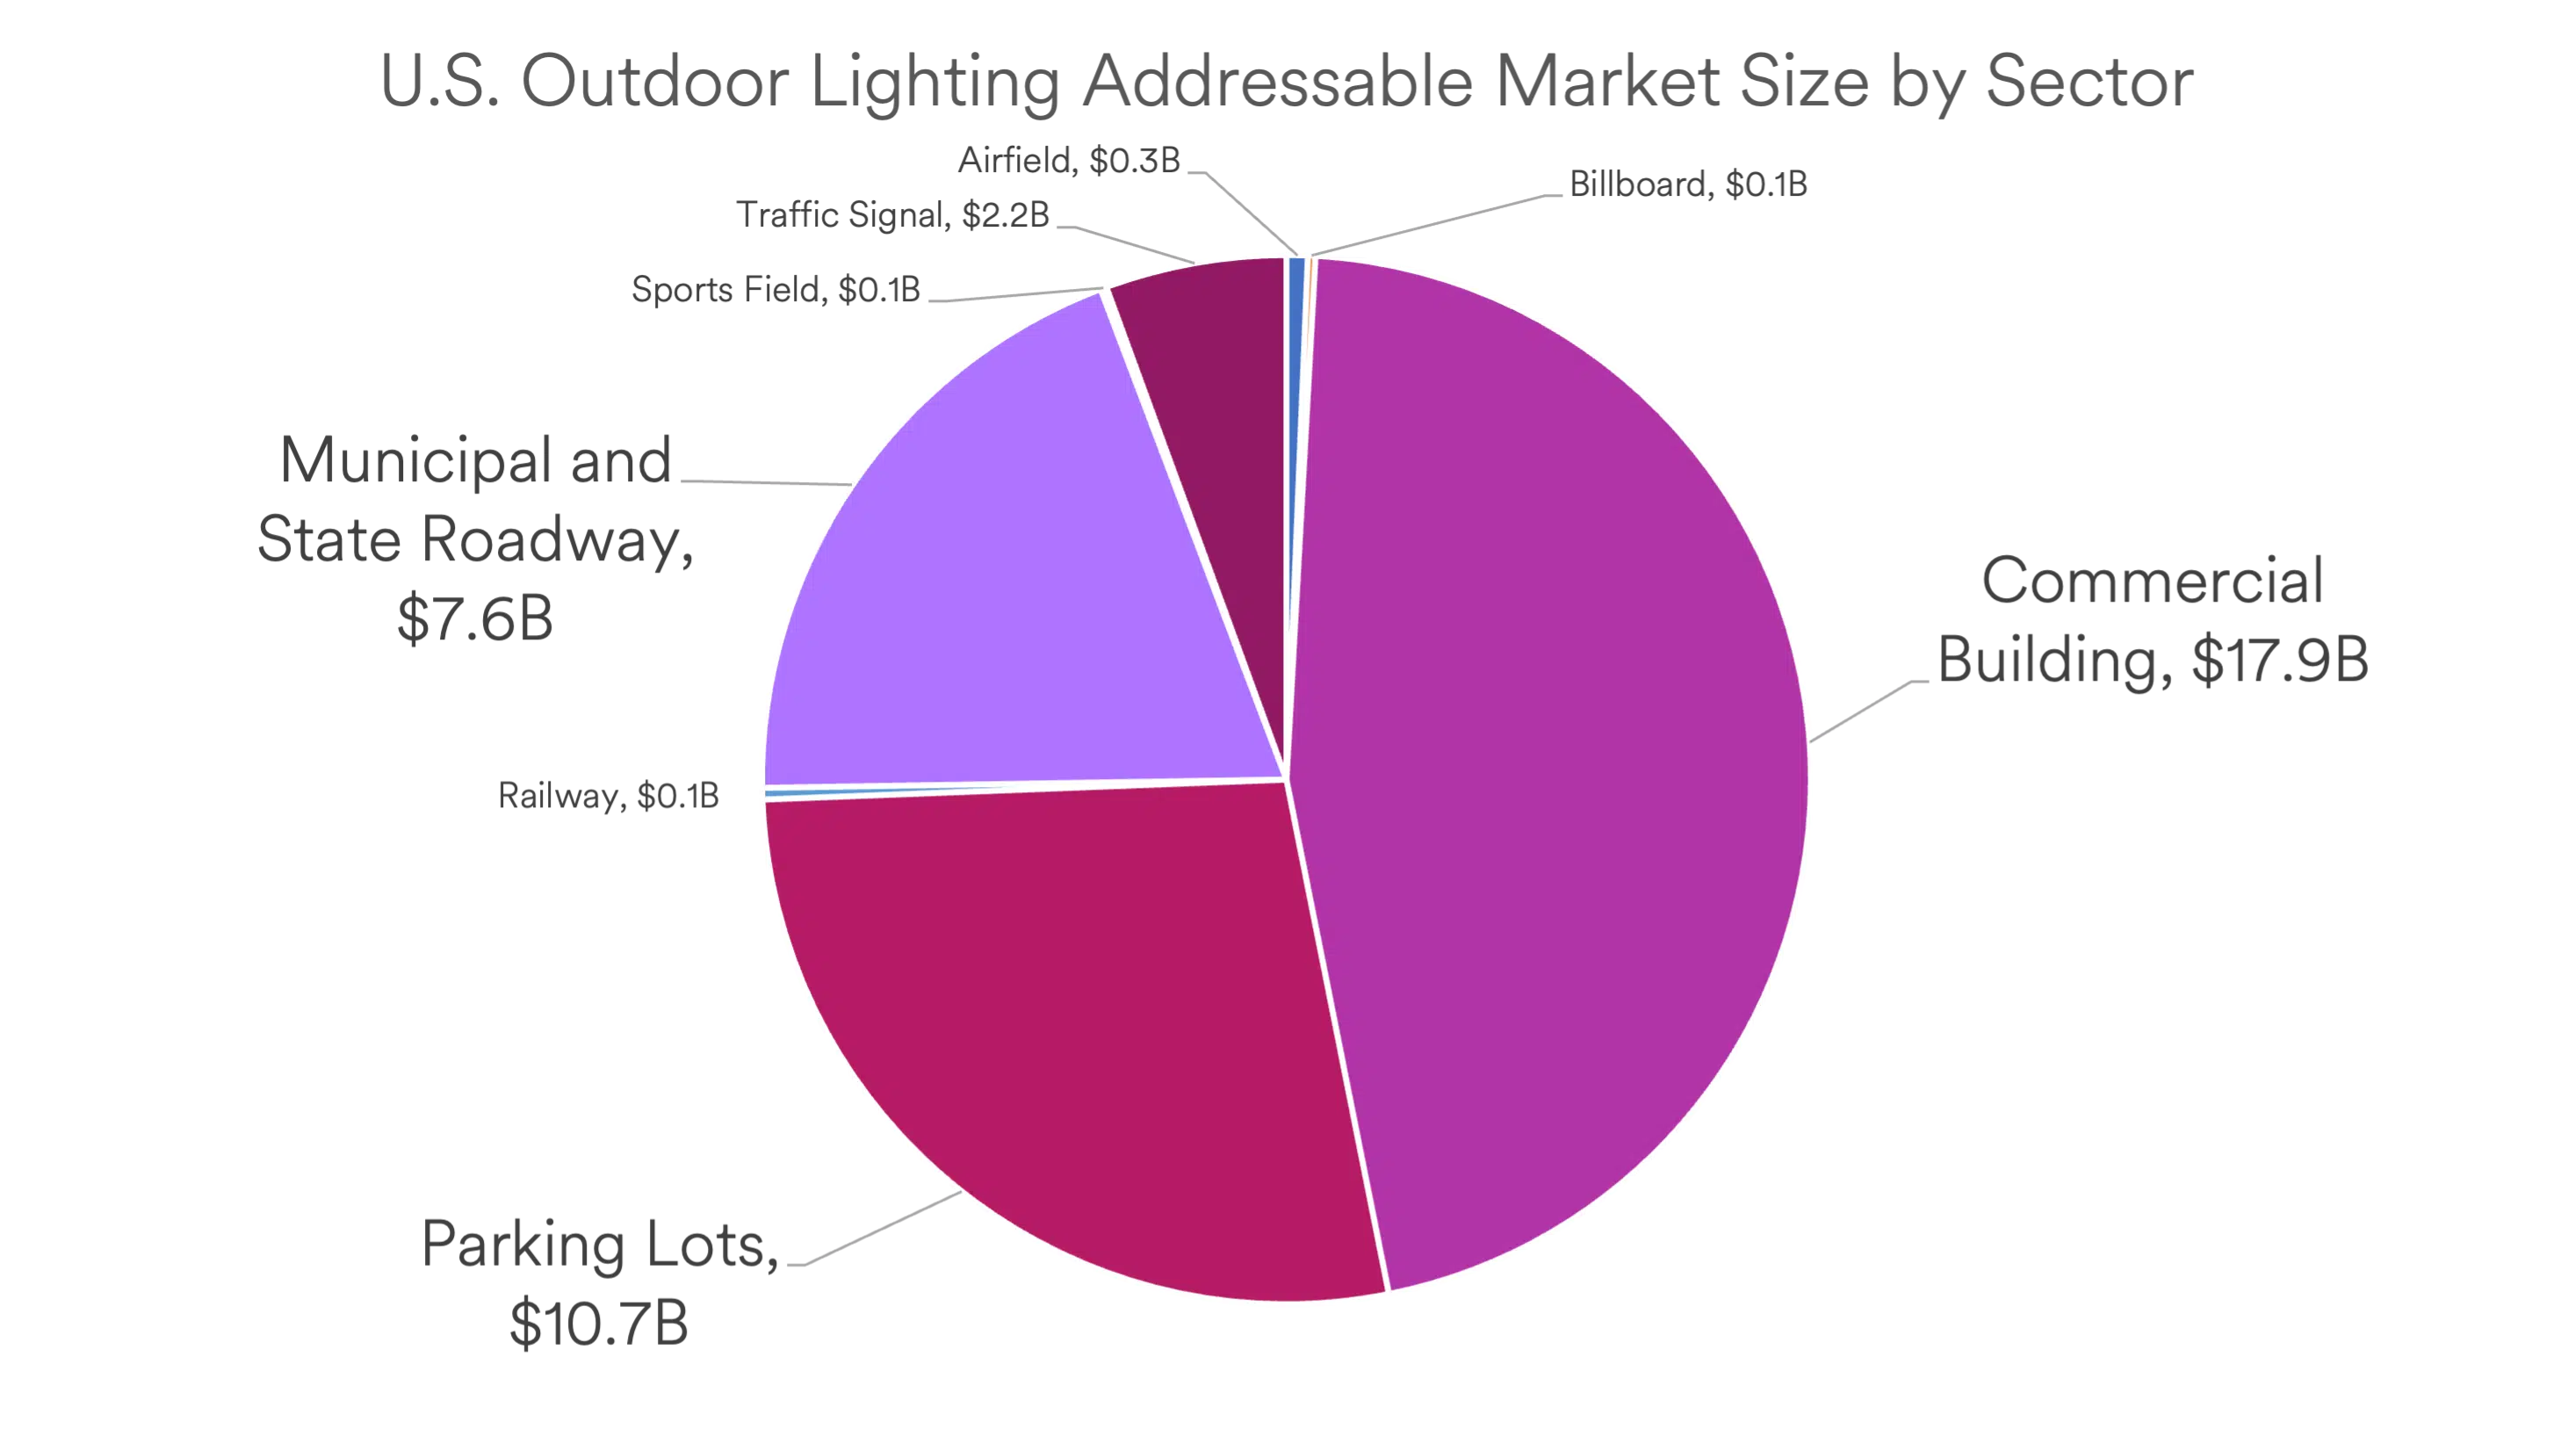 A pie chart showing the total addressable US market for Smart Lighting